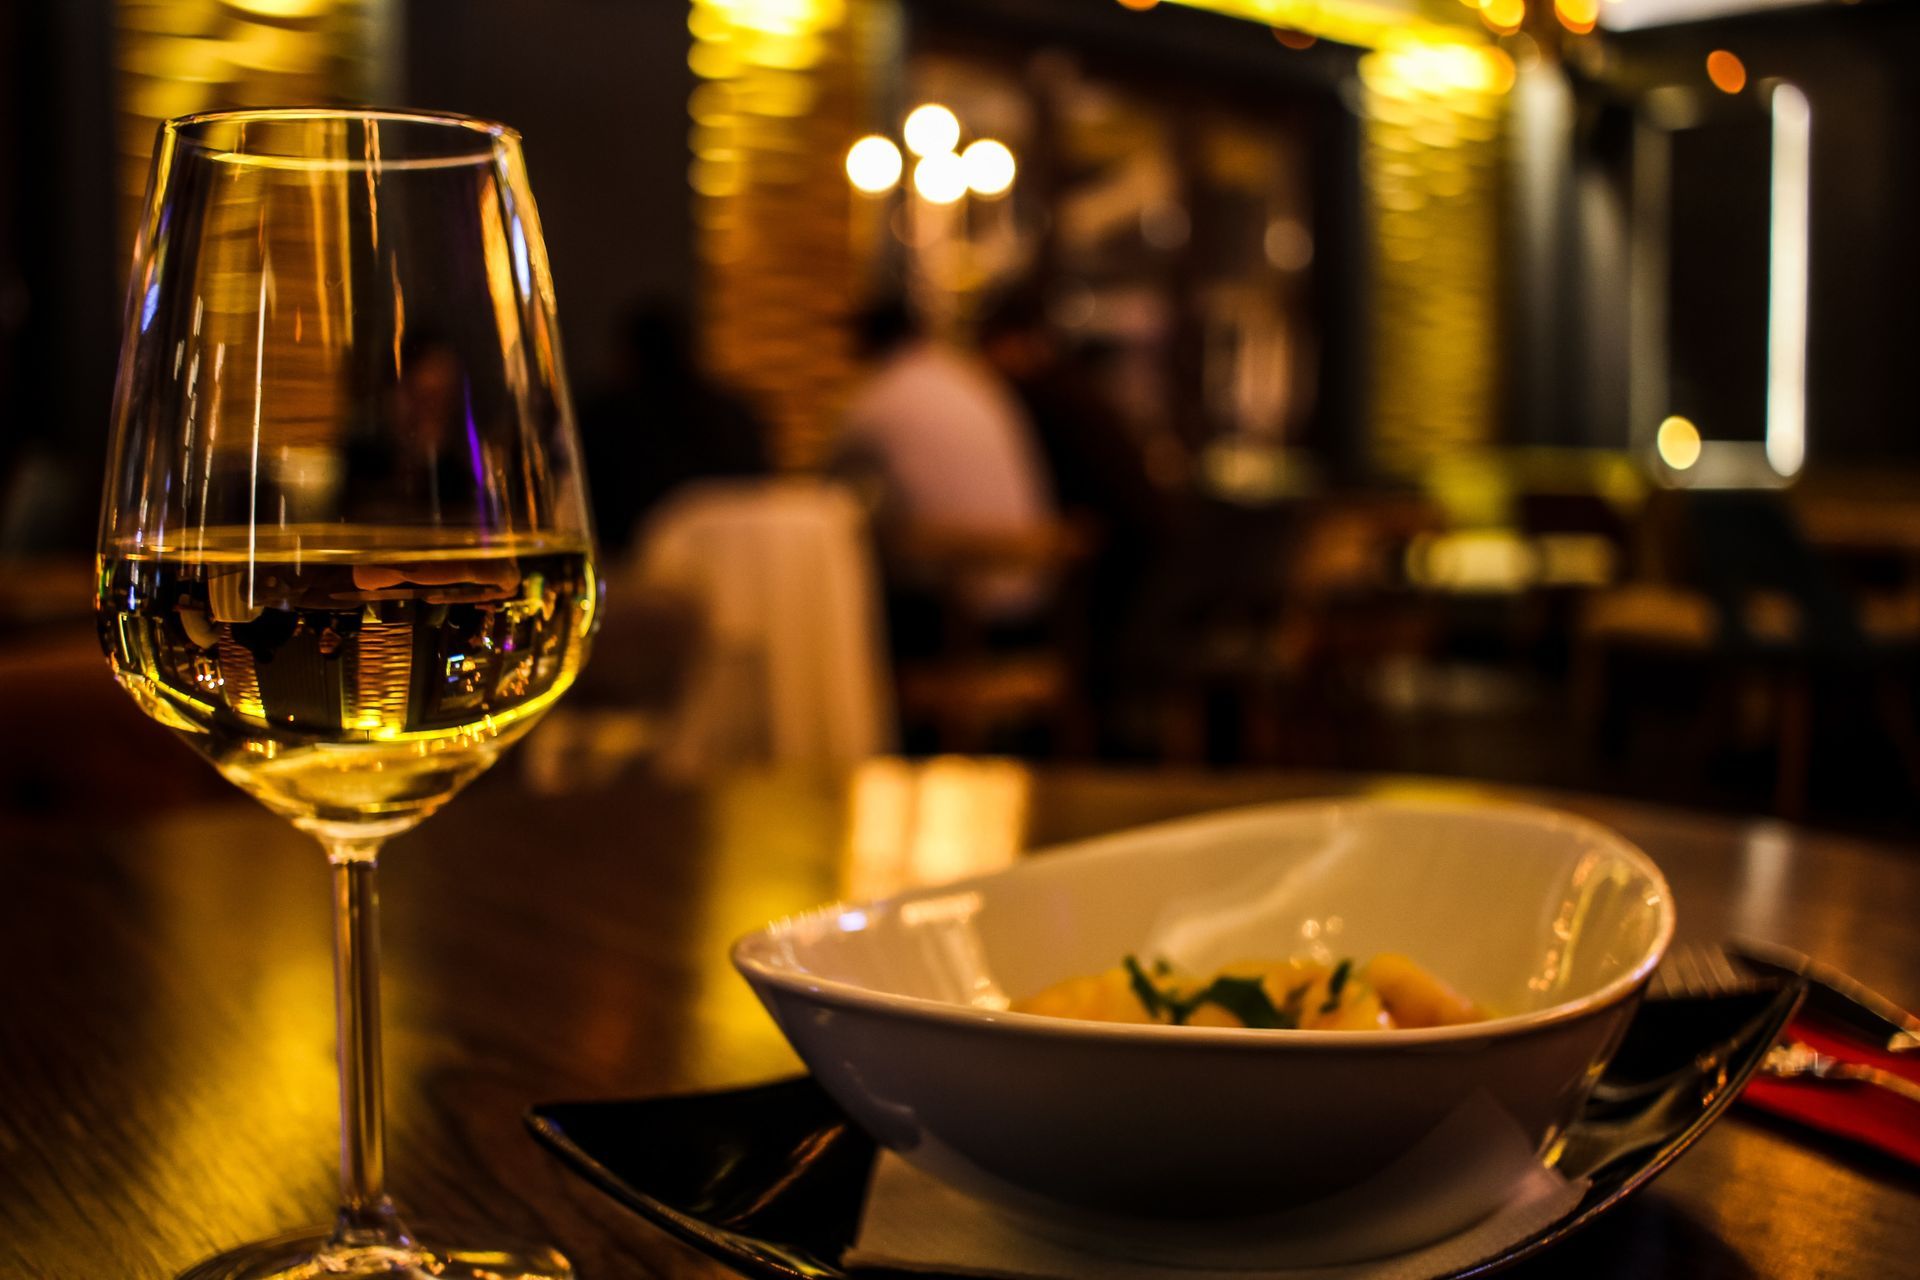 A glass of wine and a dish of food at an upscale restaurant.